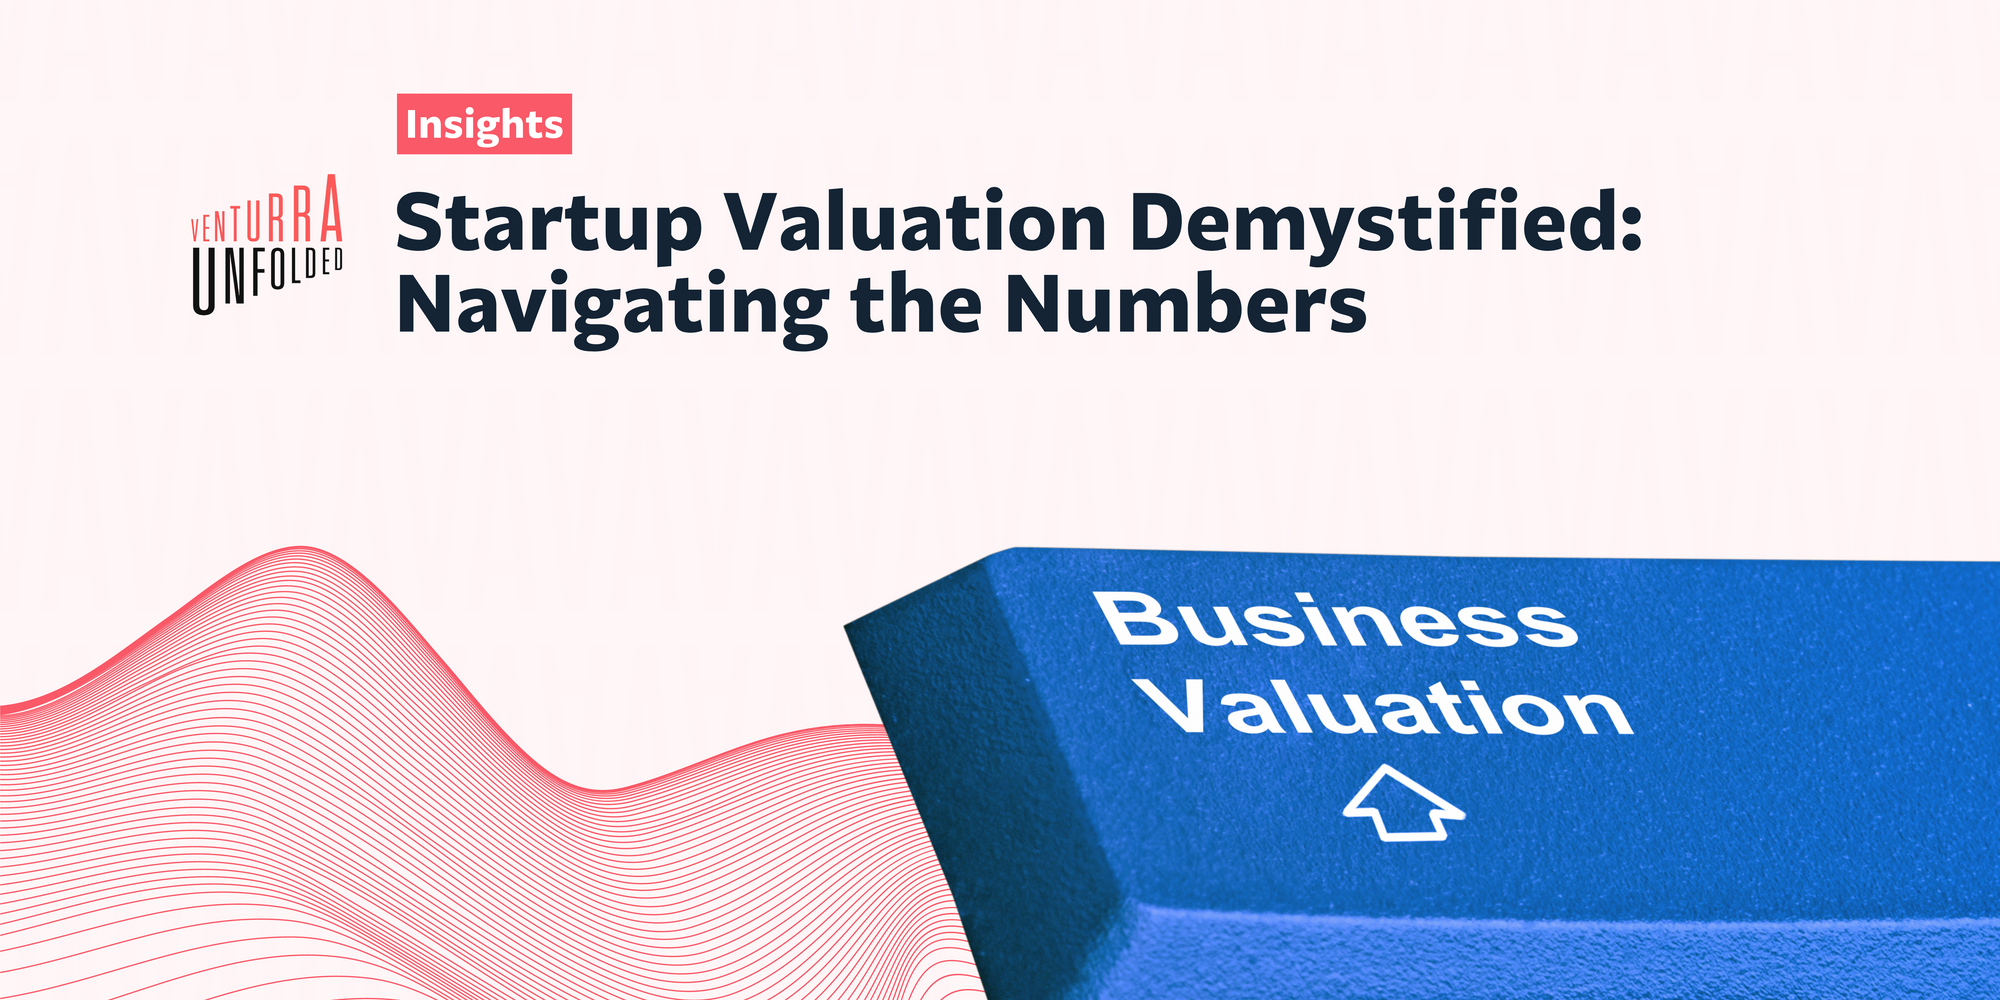 Startup Valuation Demystified: Navigating the Numbers